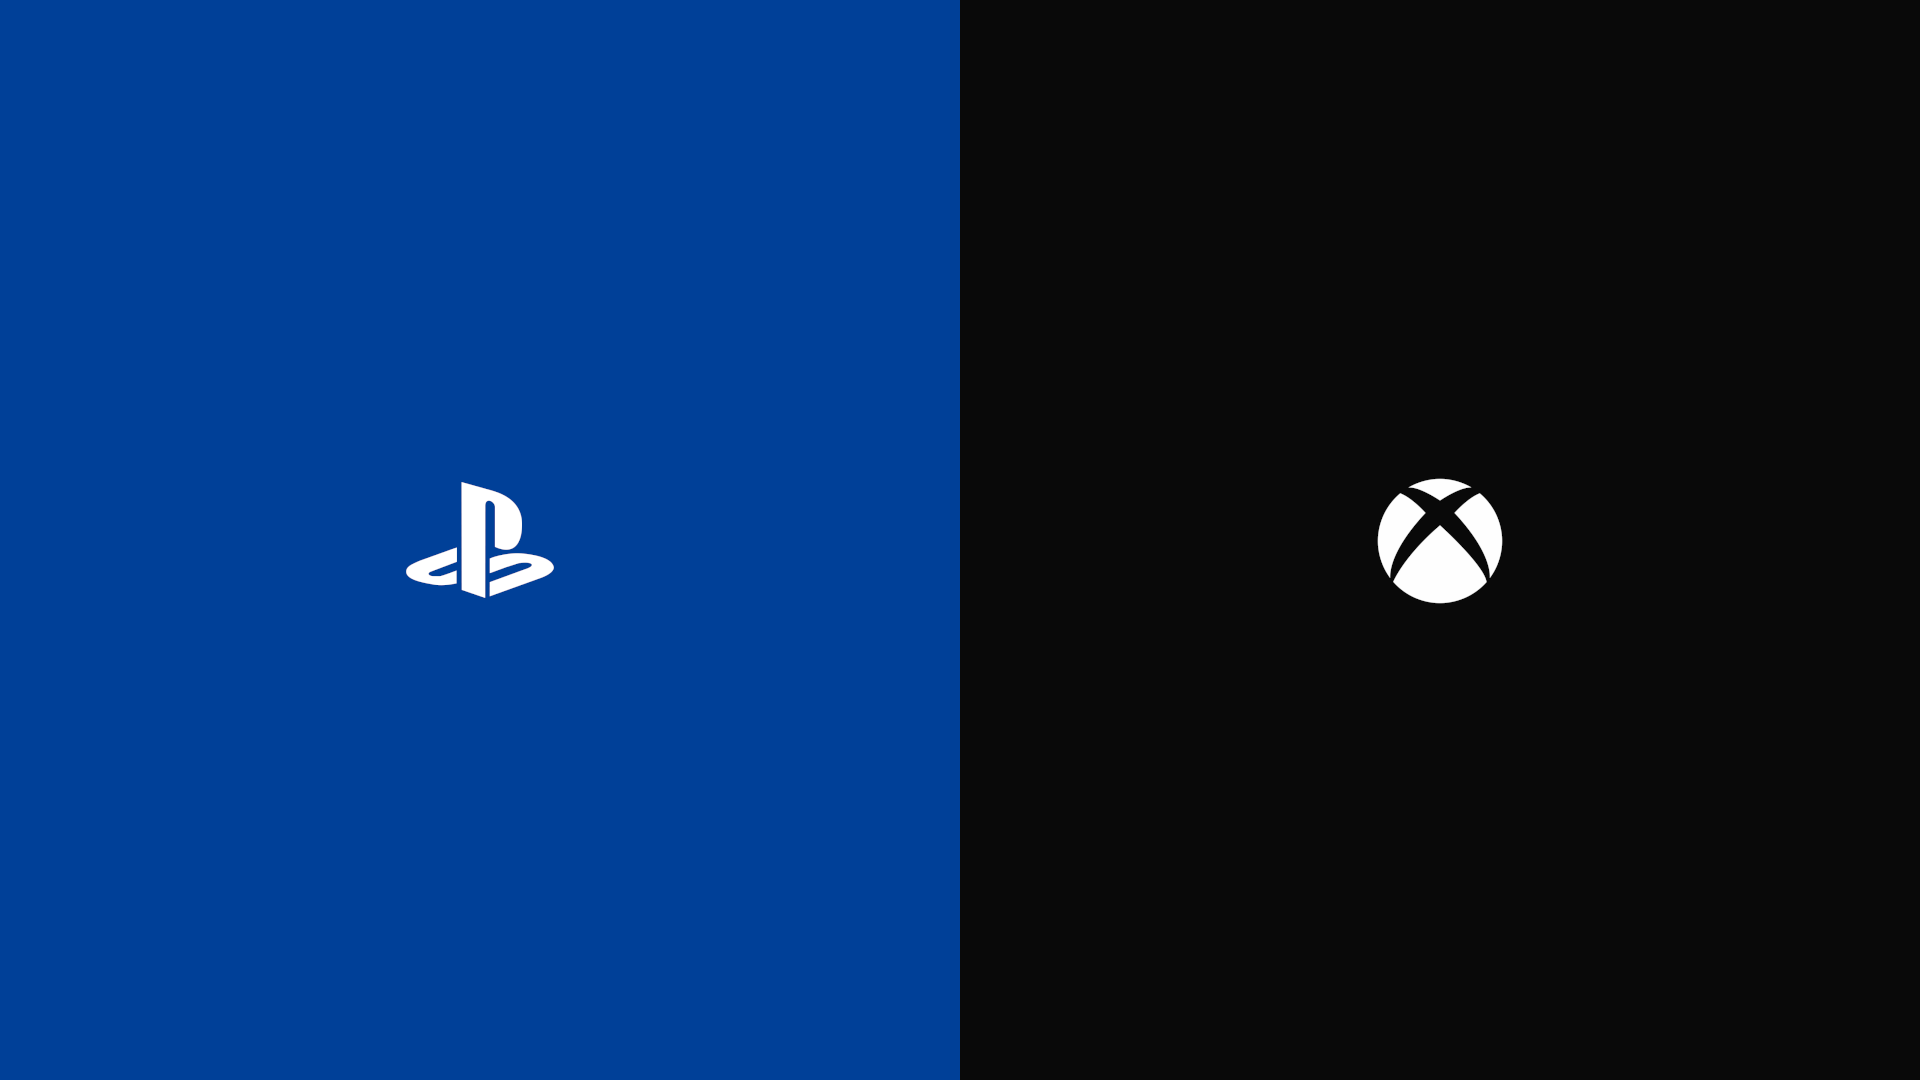 Ps4 Logo Wallpaper Images Pictures   Becuo 1920x1080